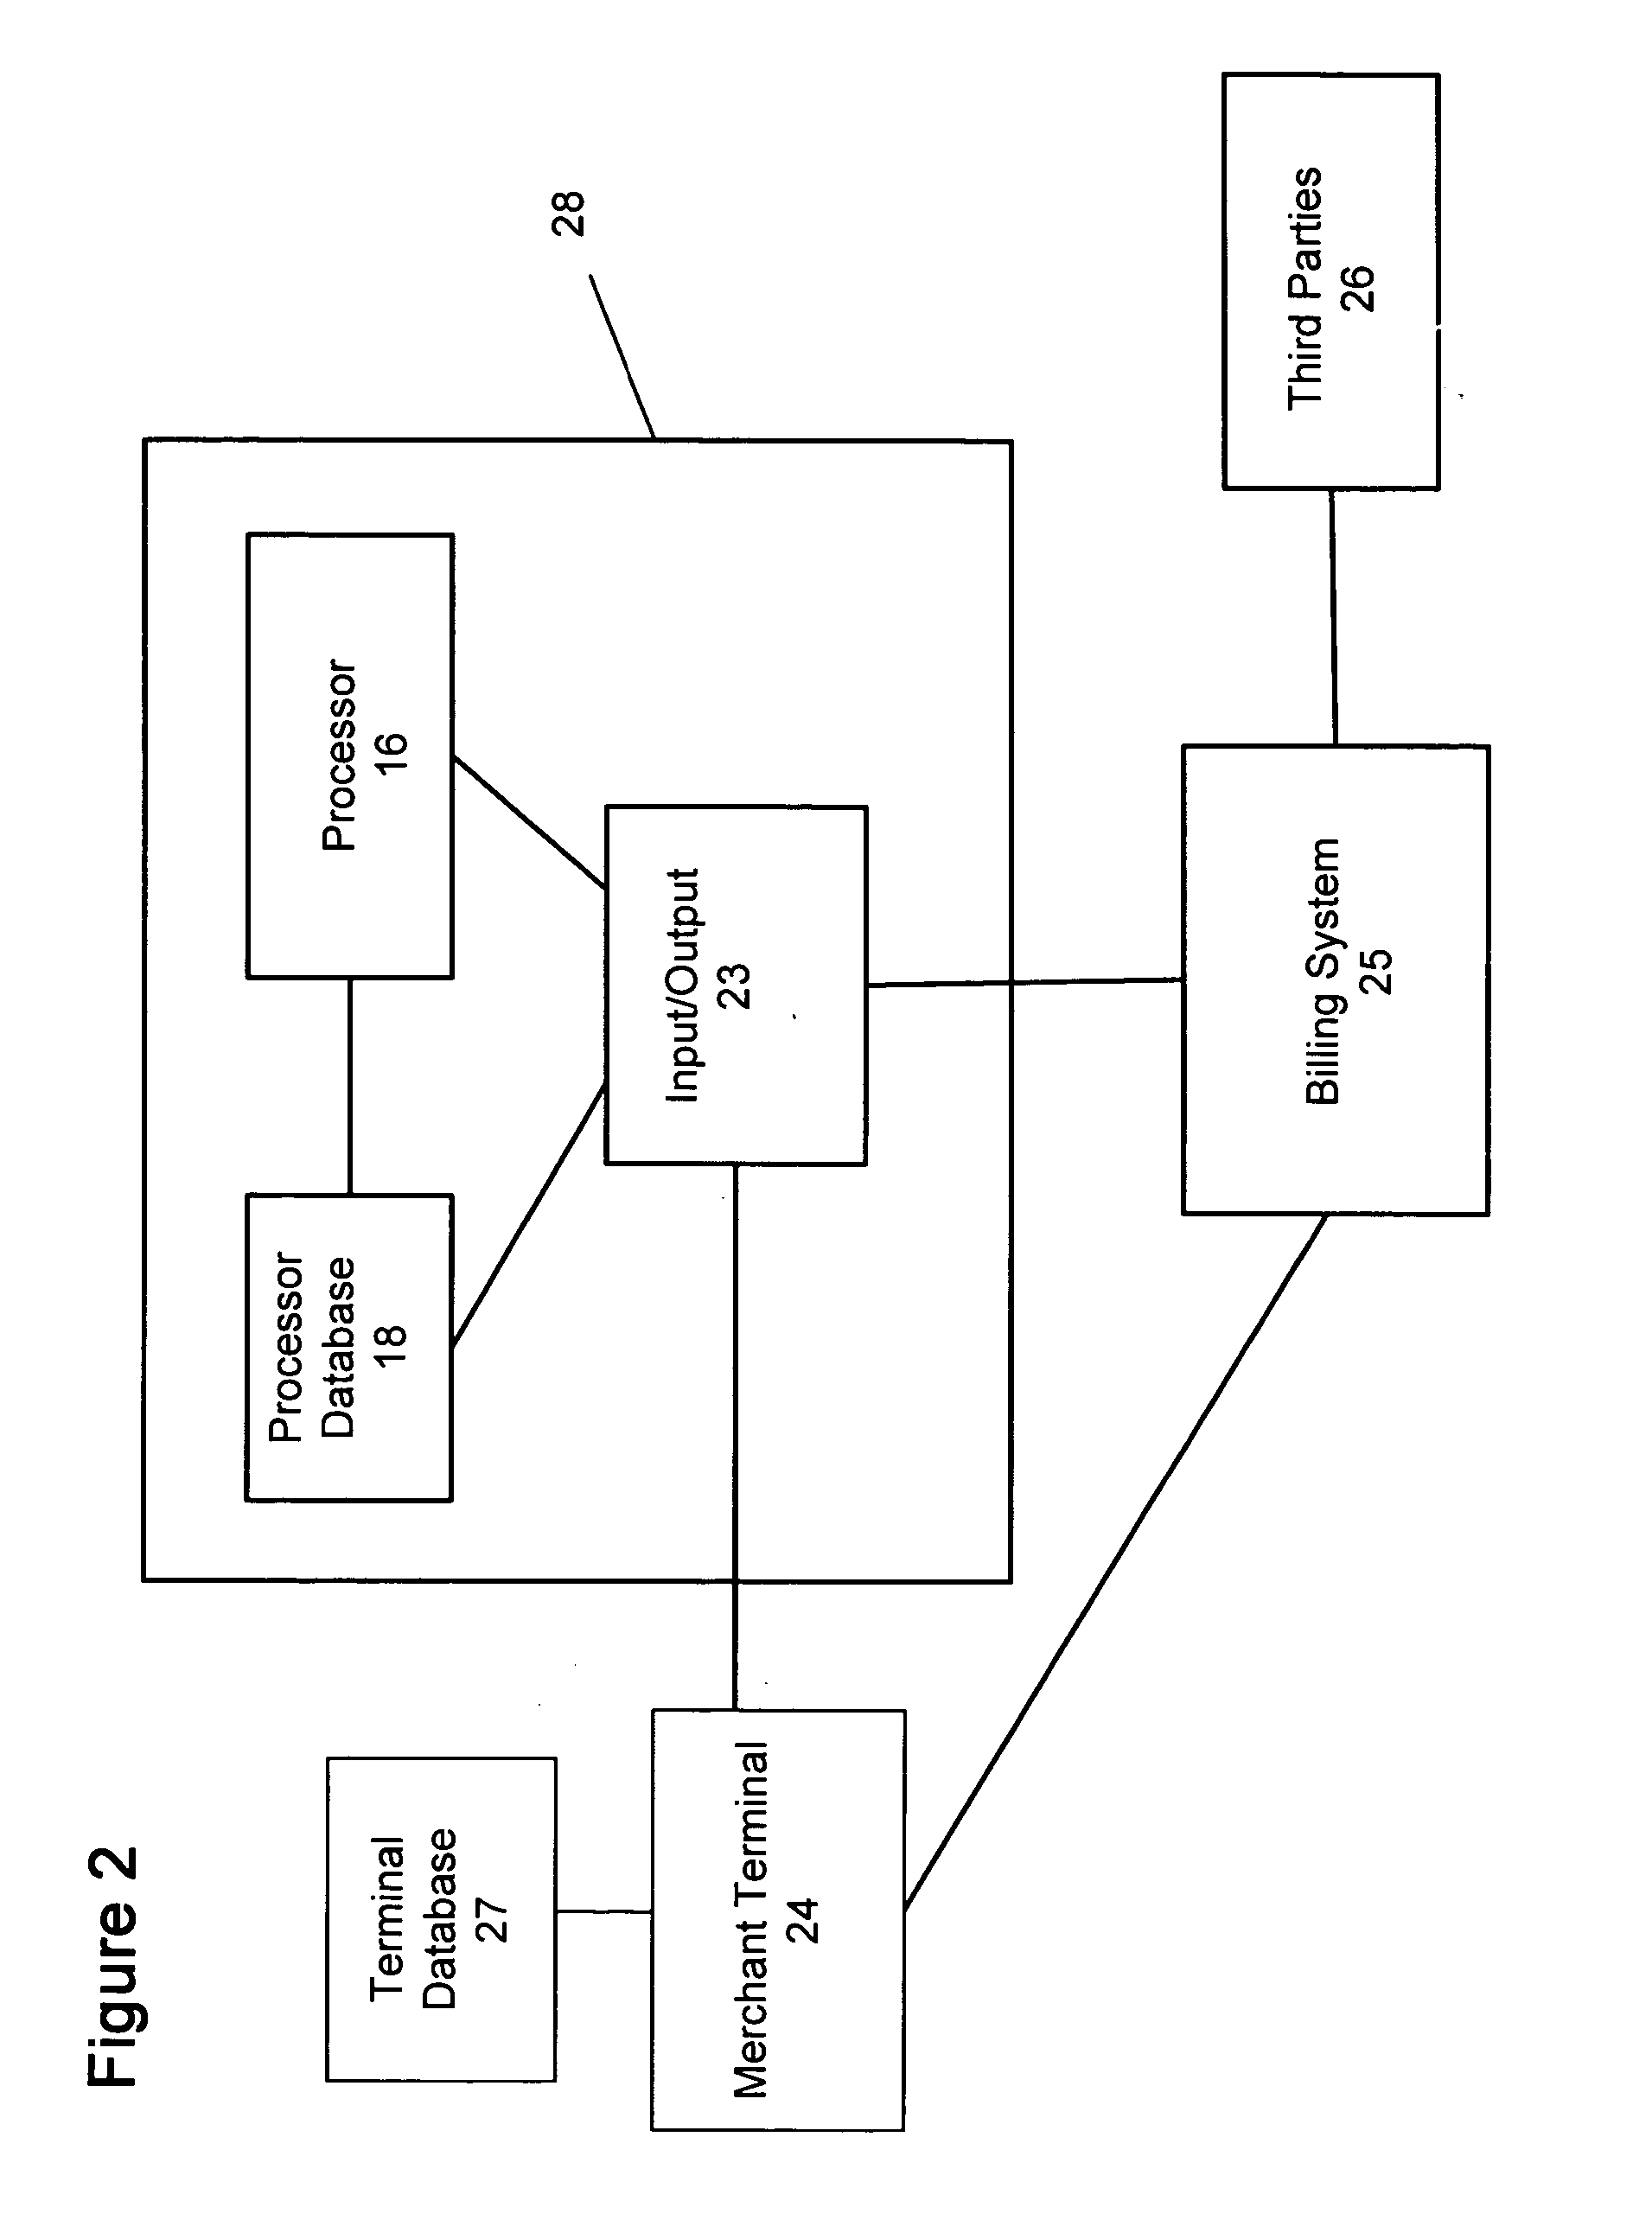 System and method for confirming transaction or billing communications